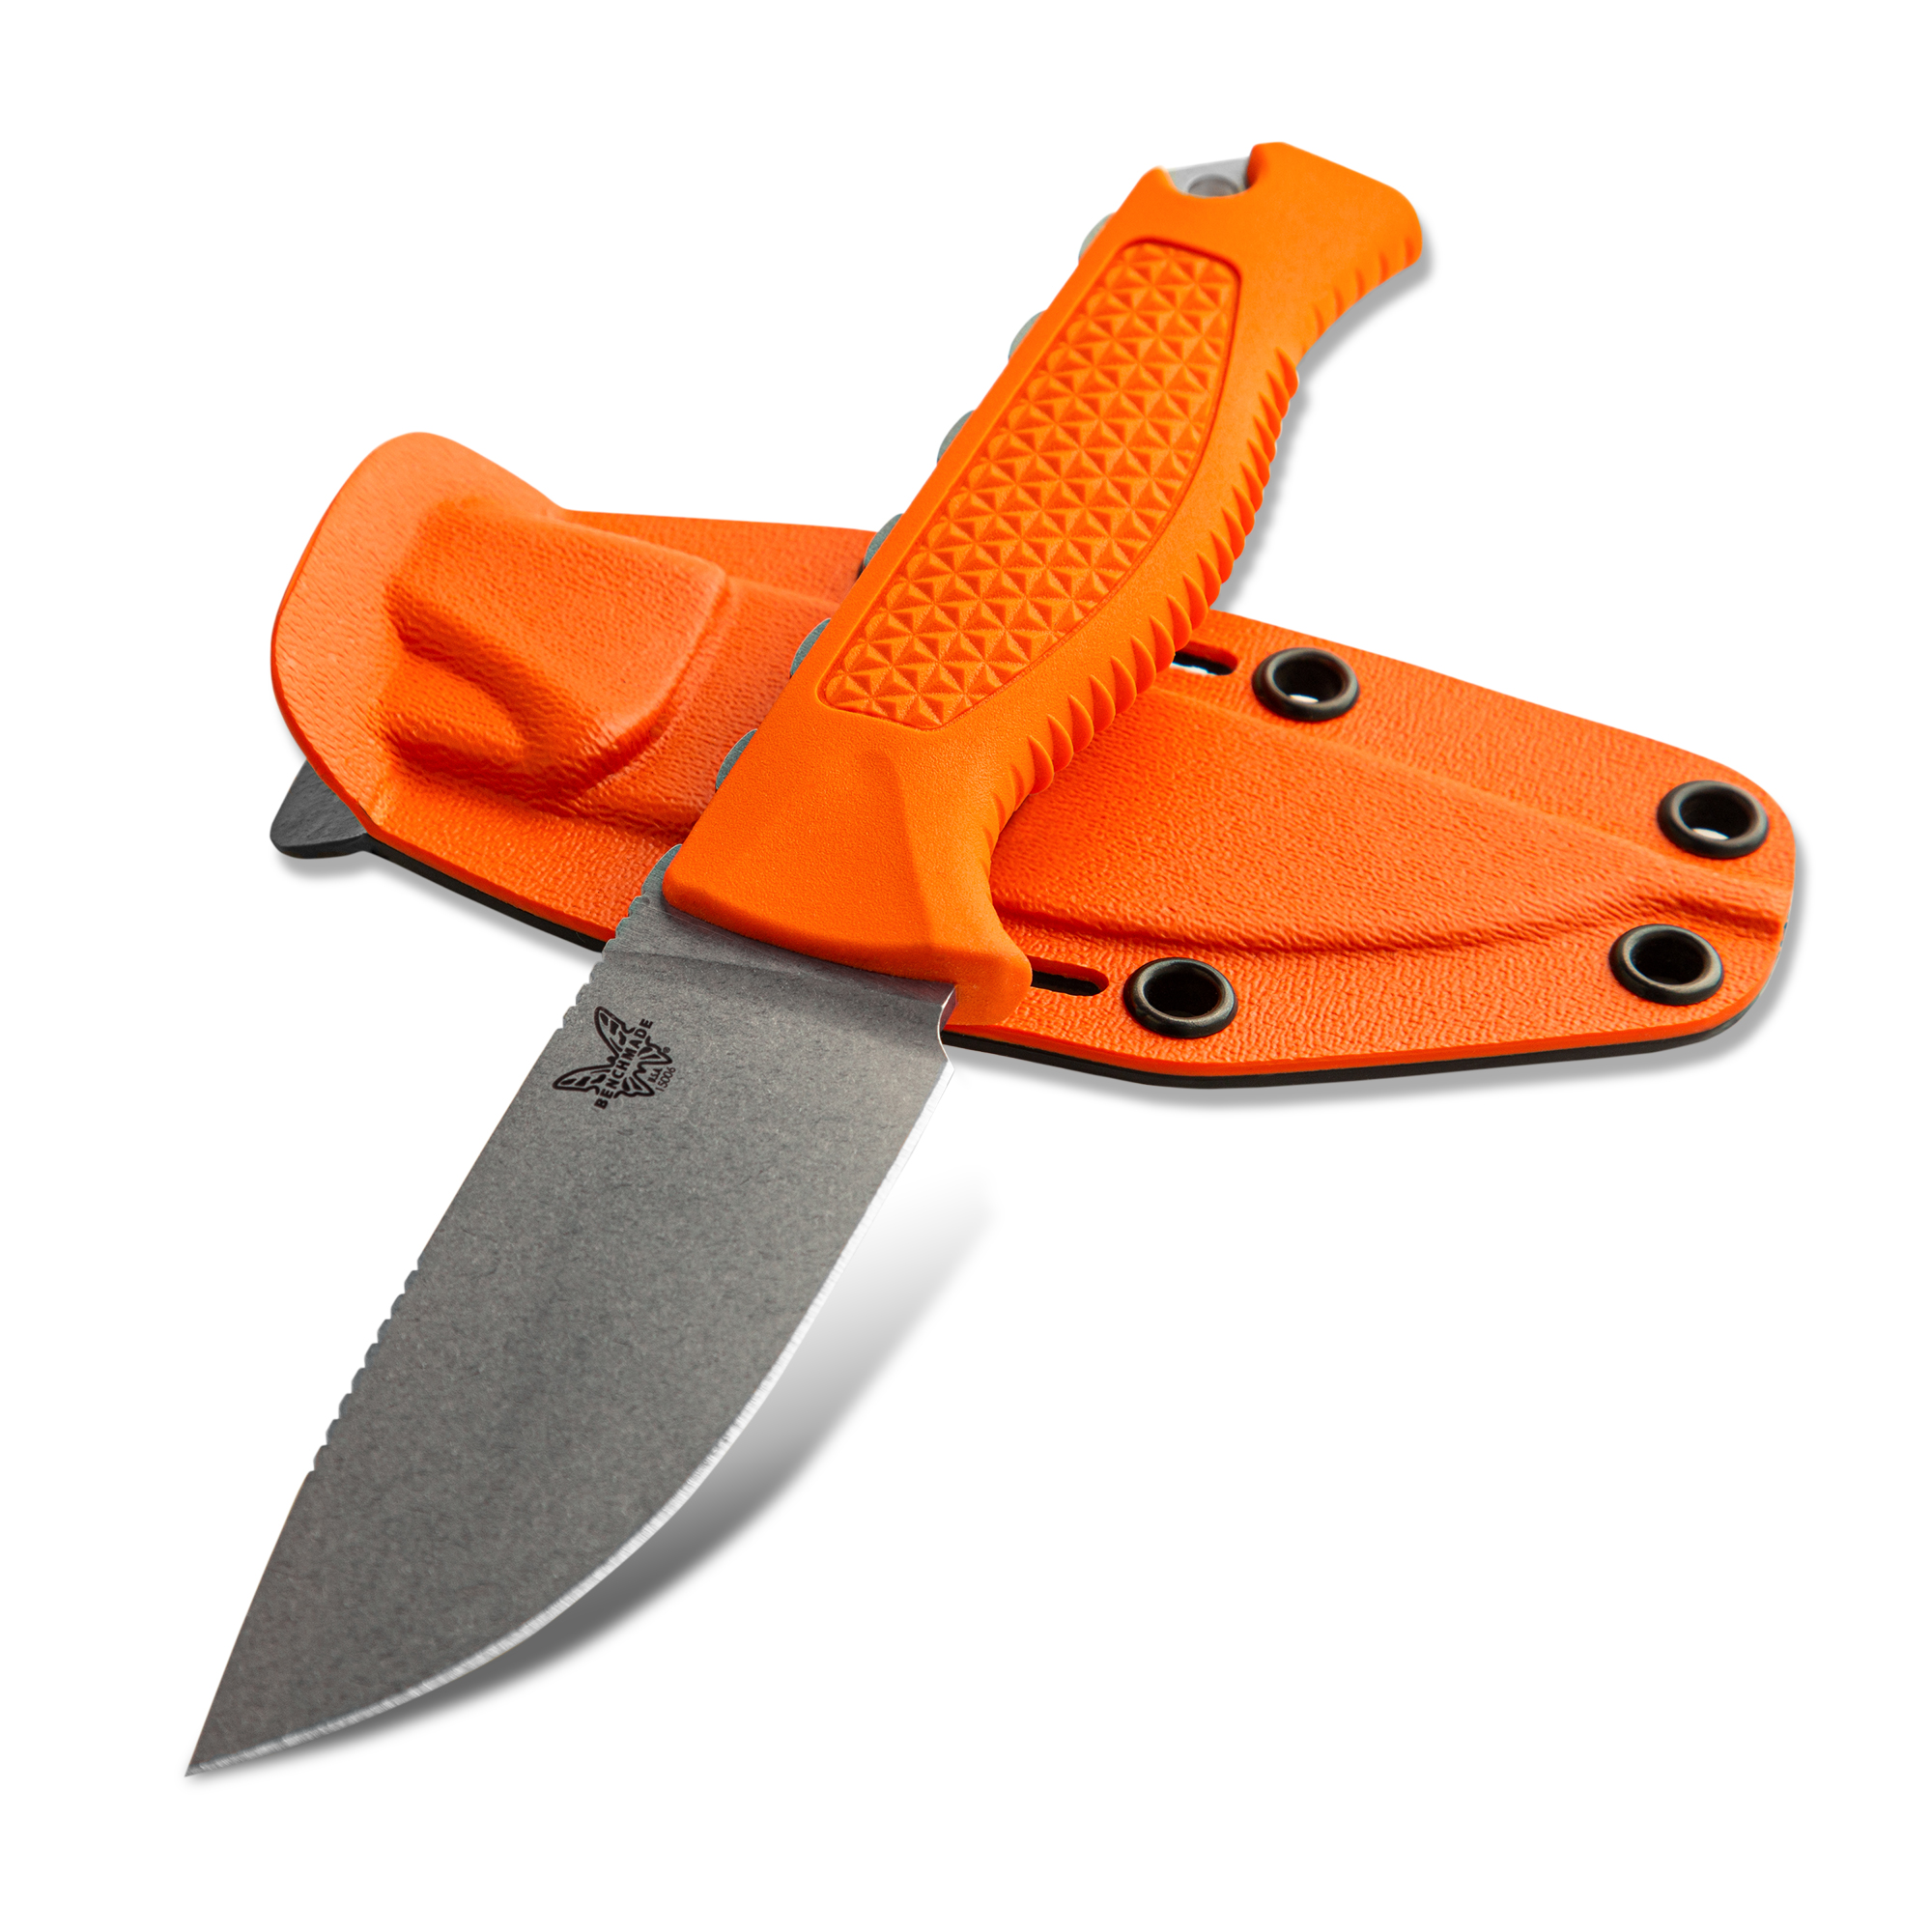 Benchmade Knife | MeatEater